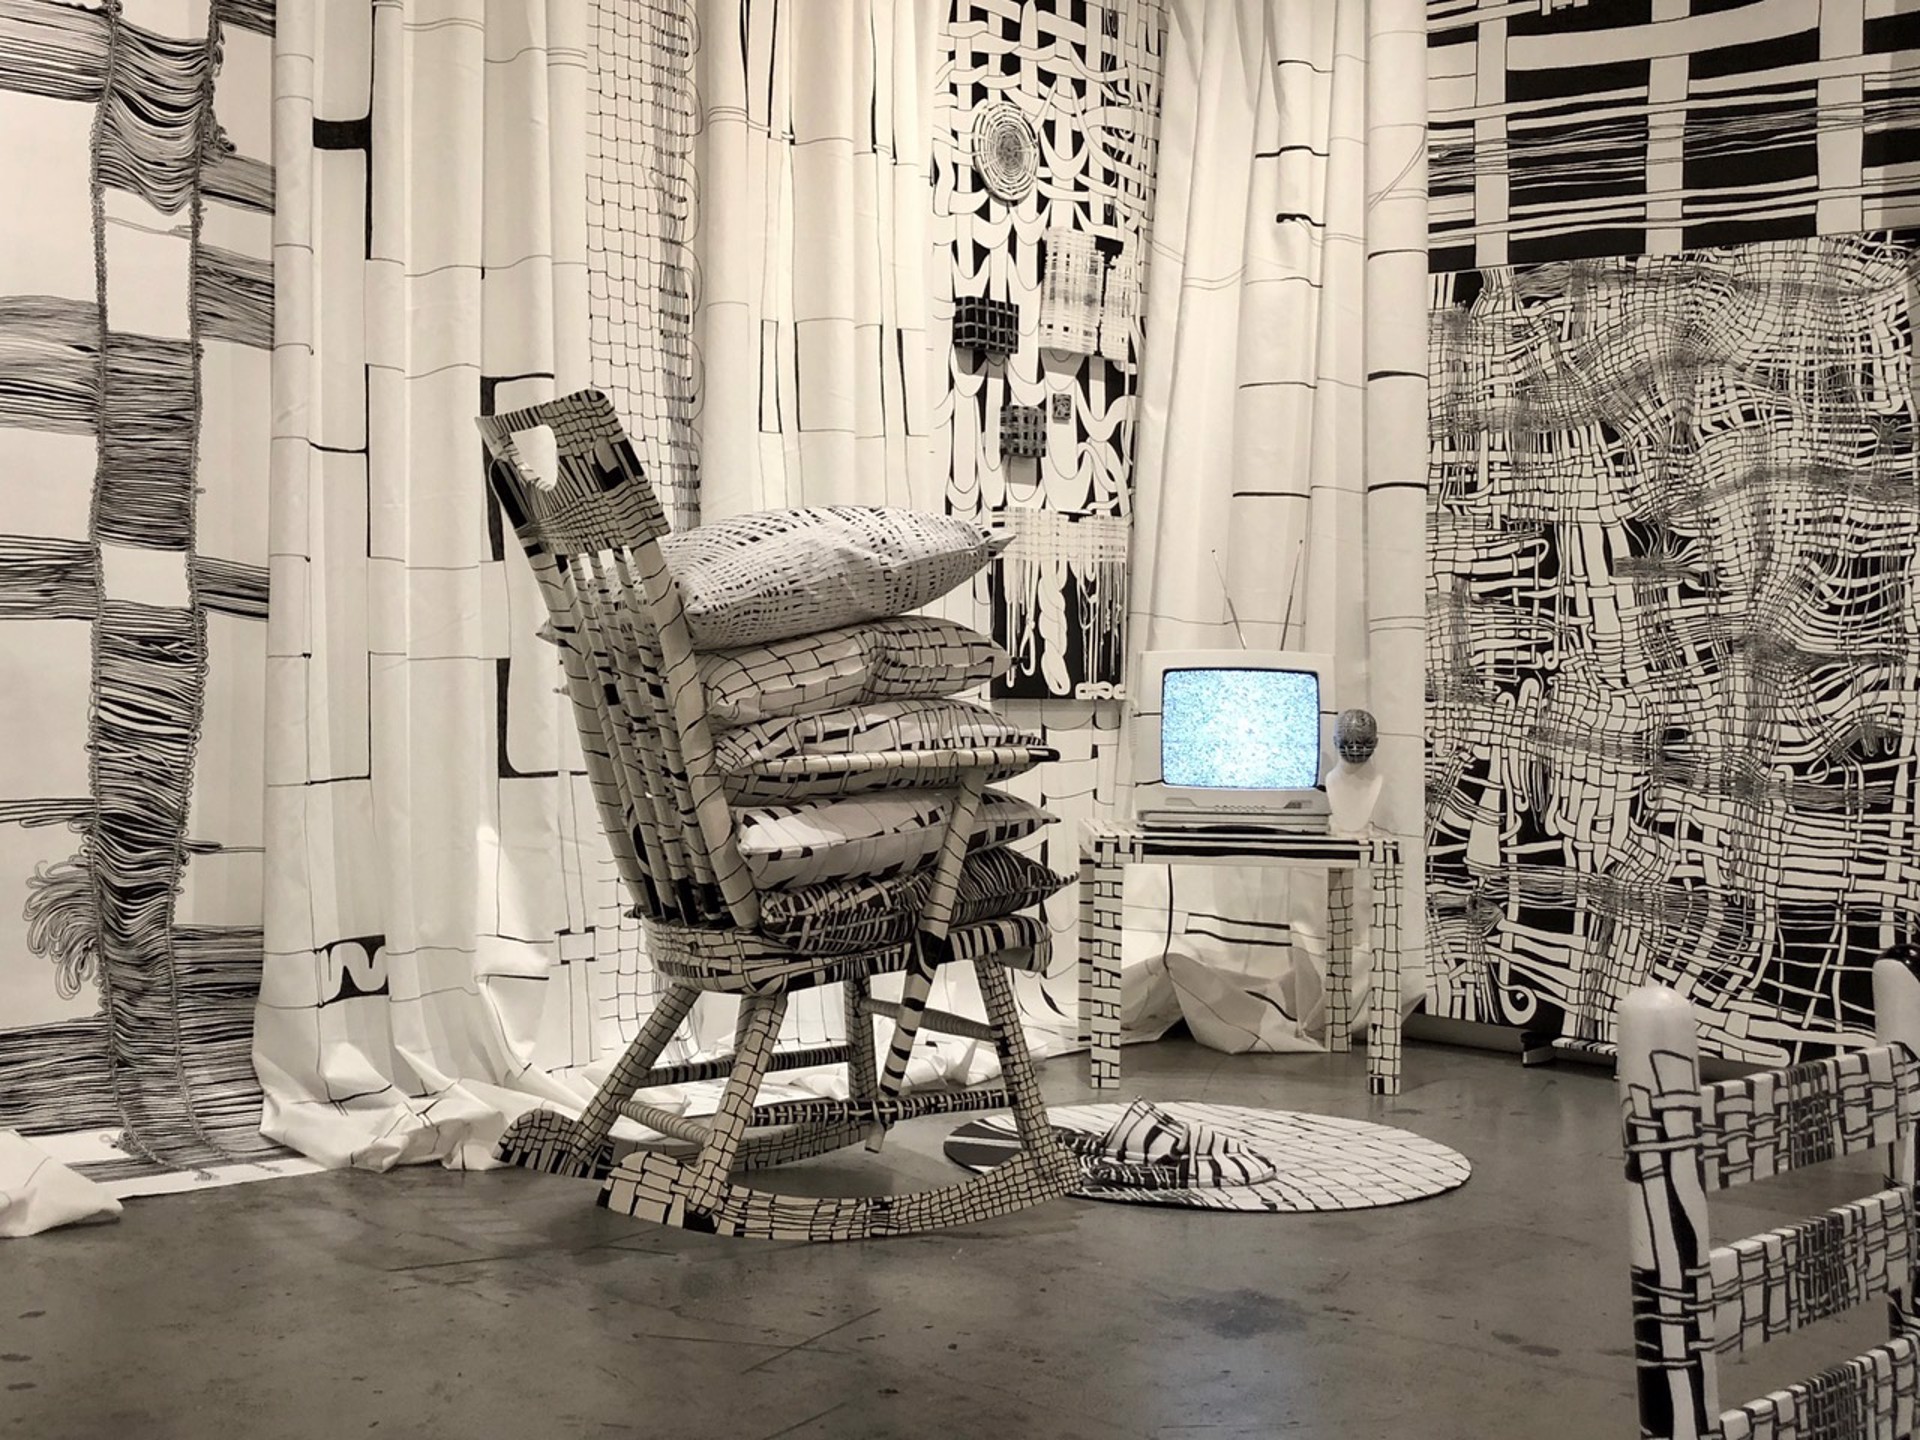 Woven Living Room Installation by Hedwige Jacobs